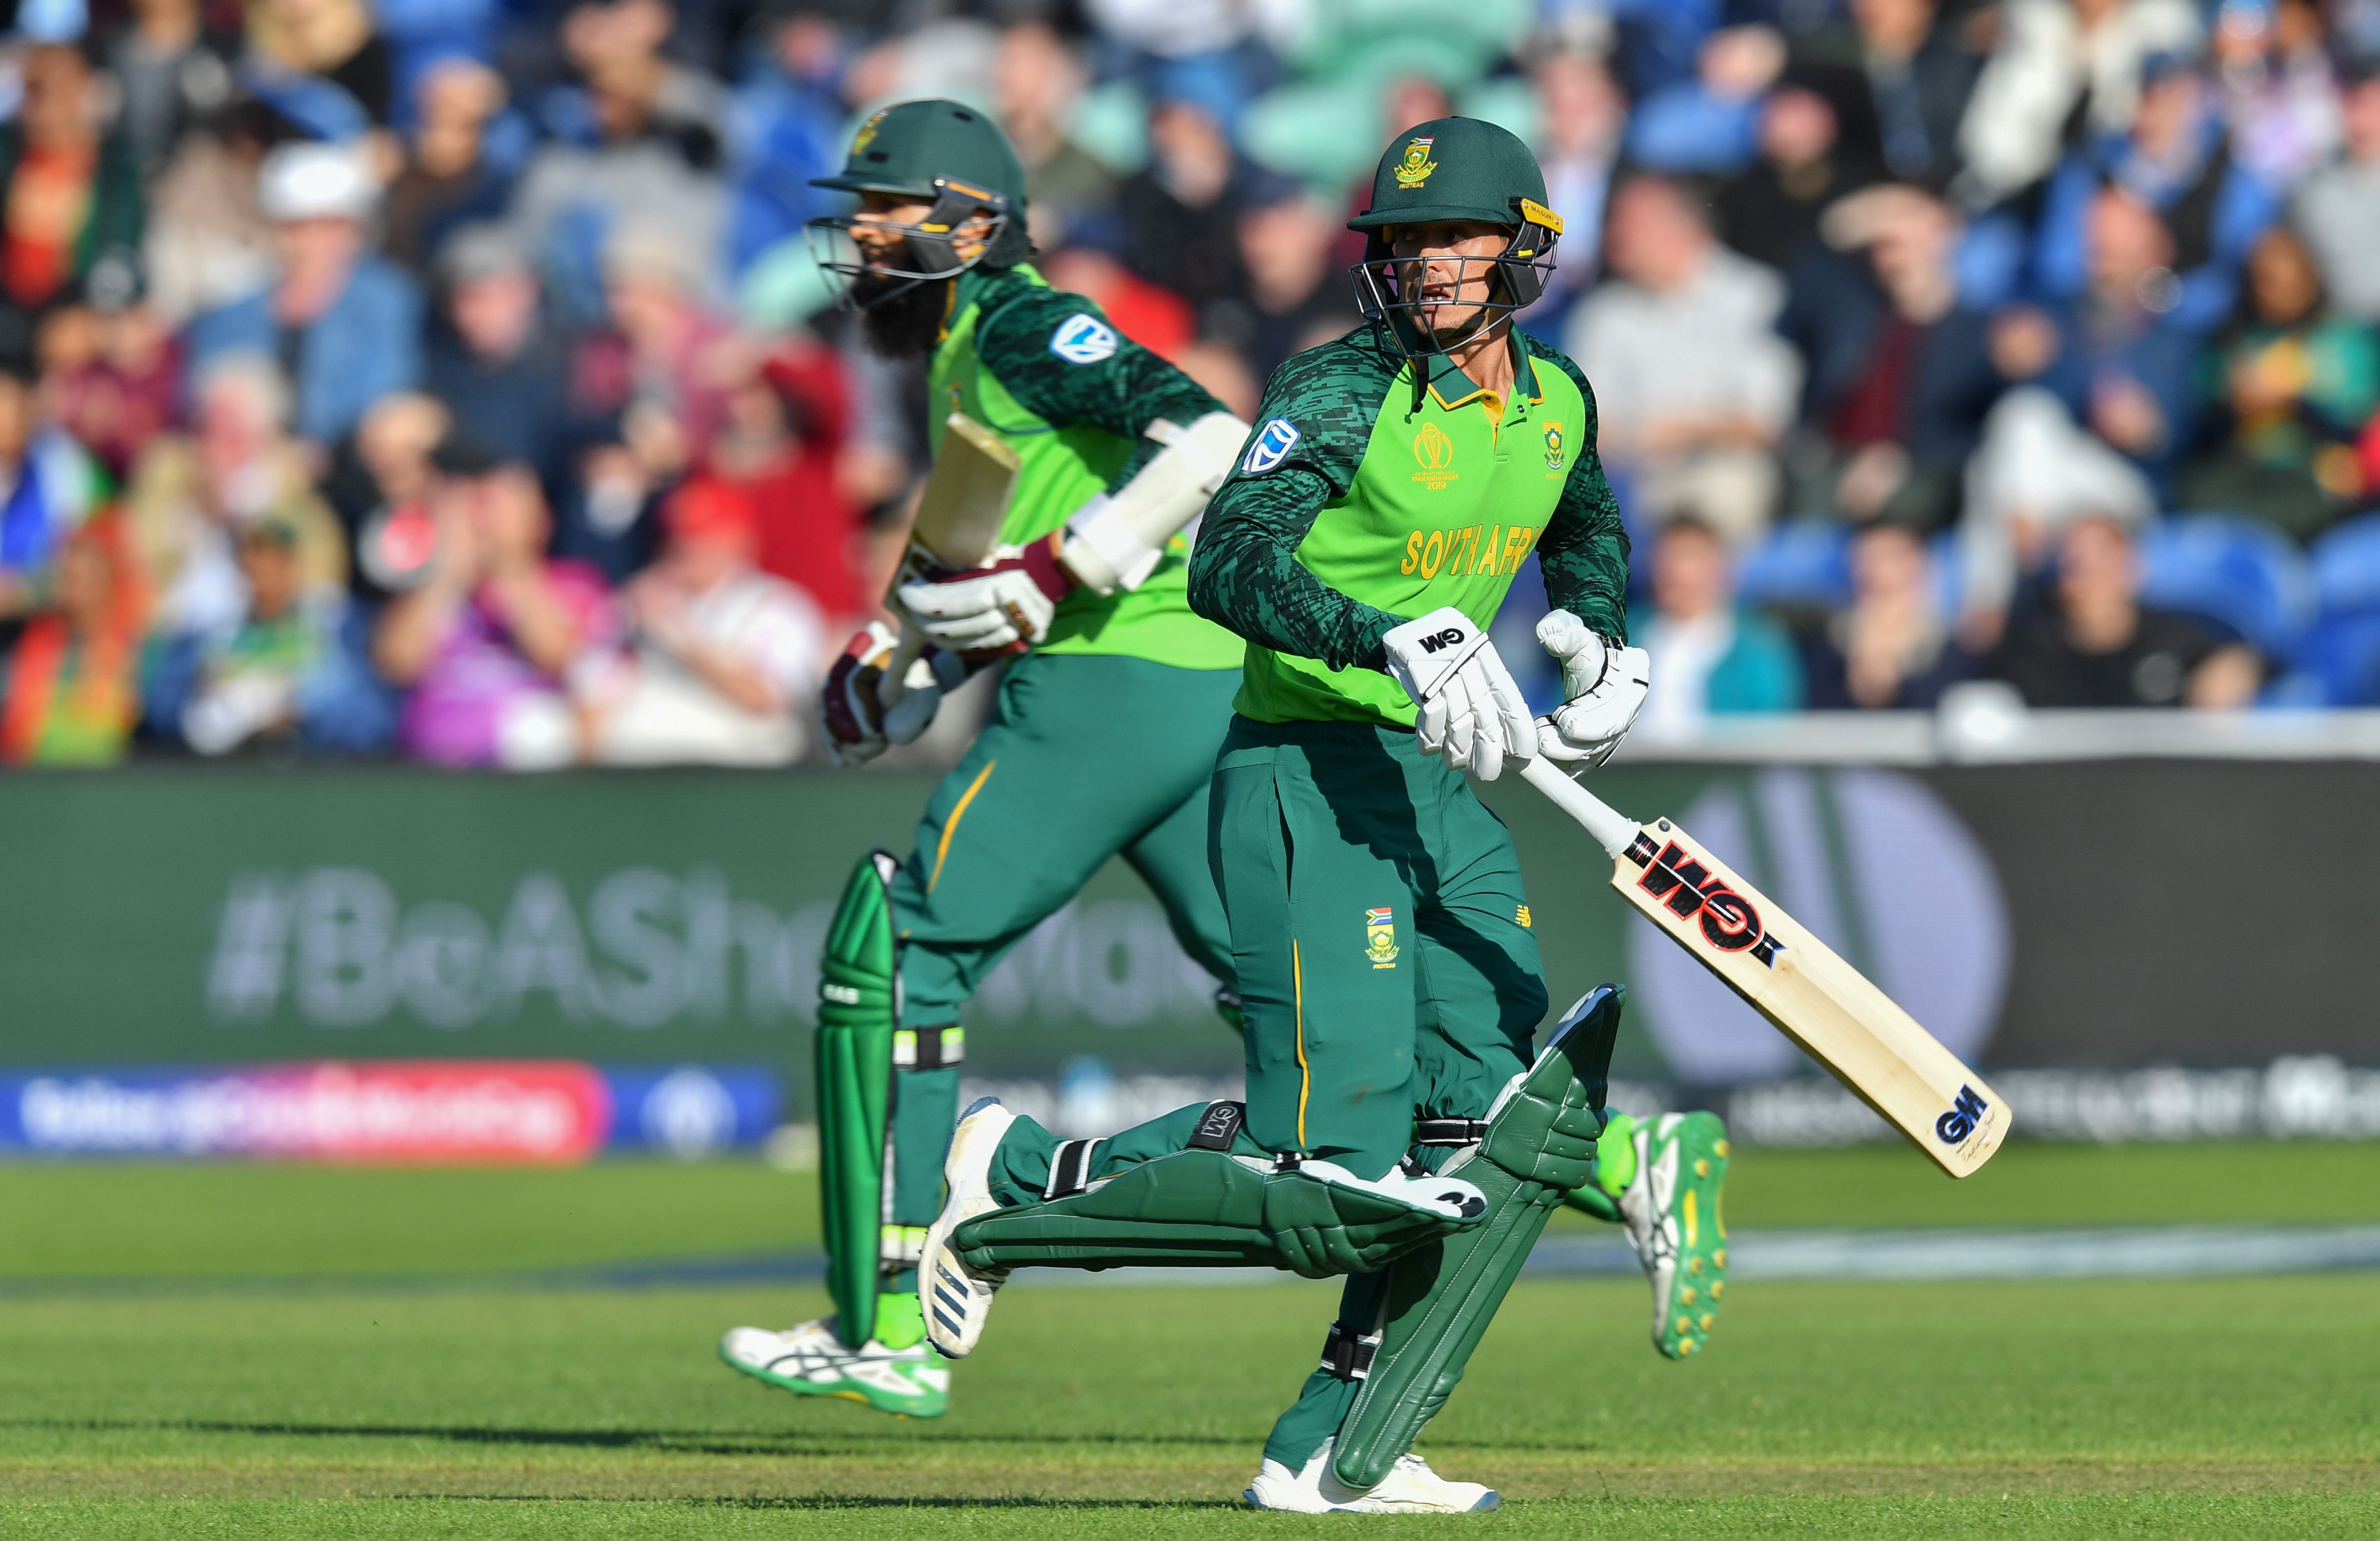 CWC19 report card: South Africa